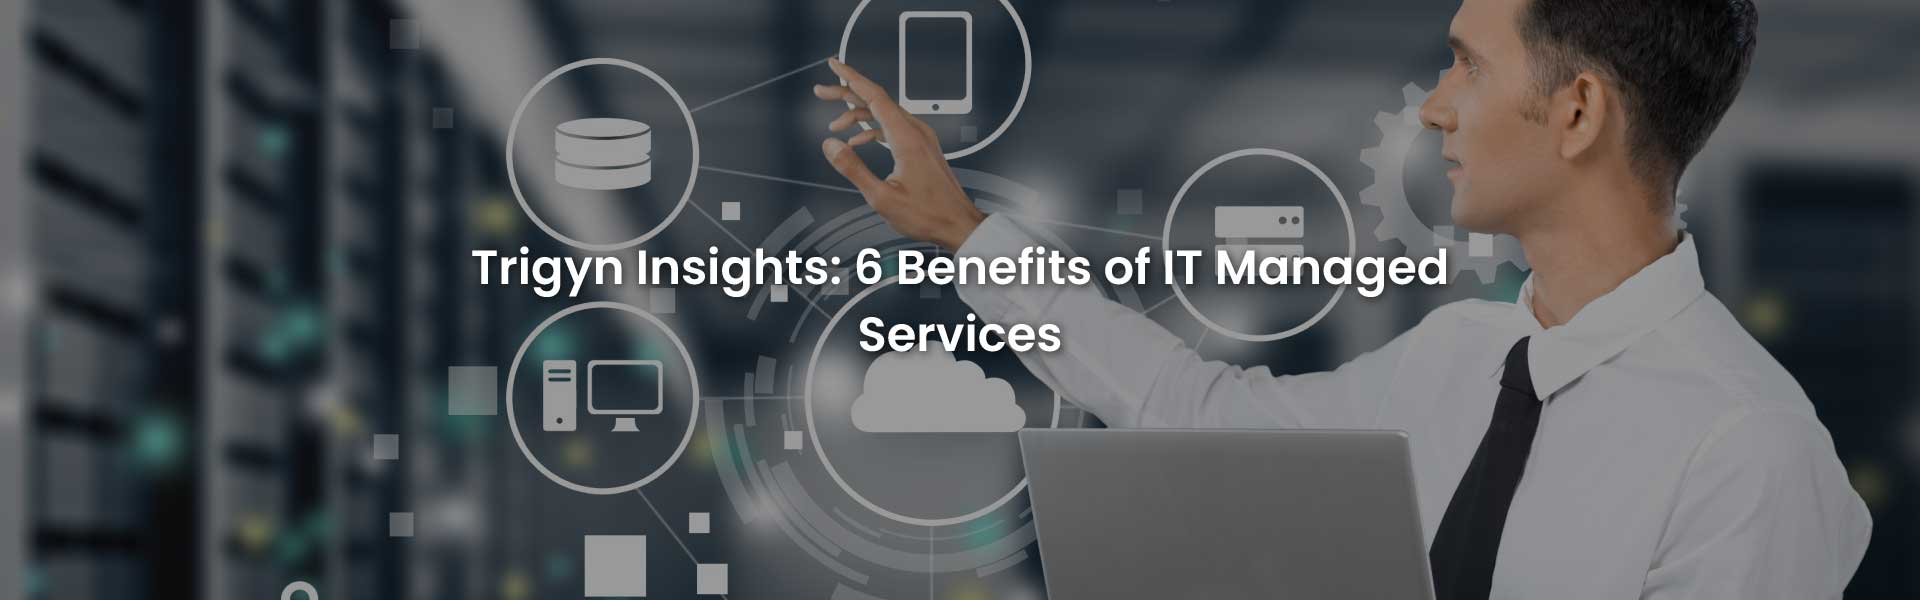 Six Benefits of IT Managed Services